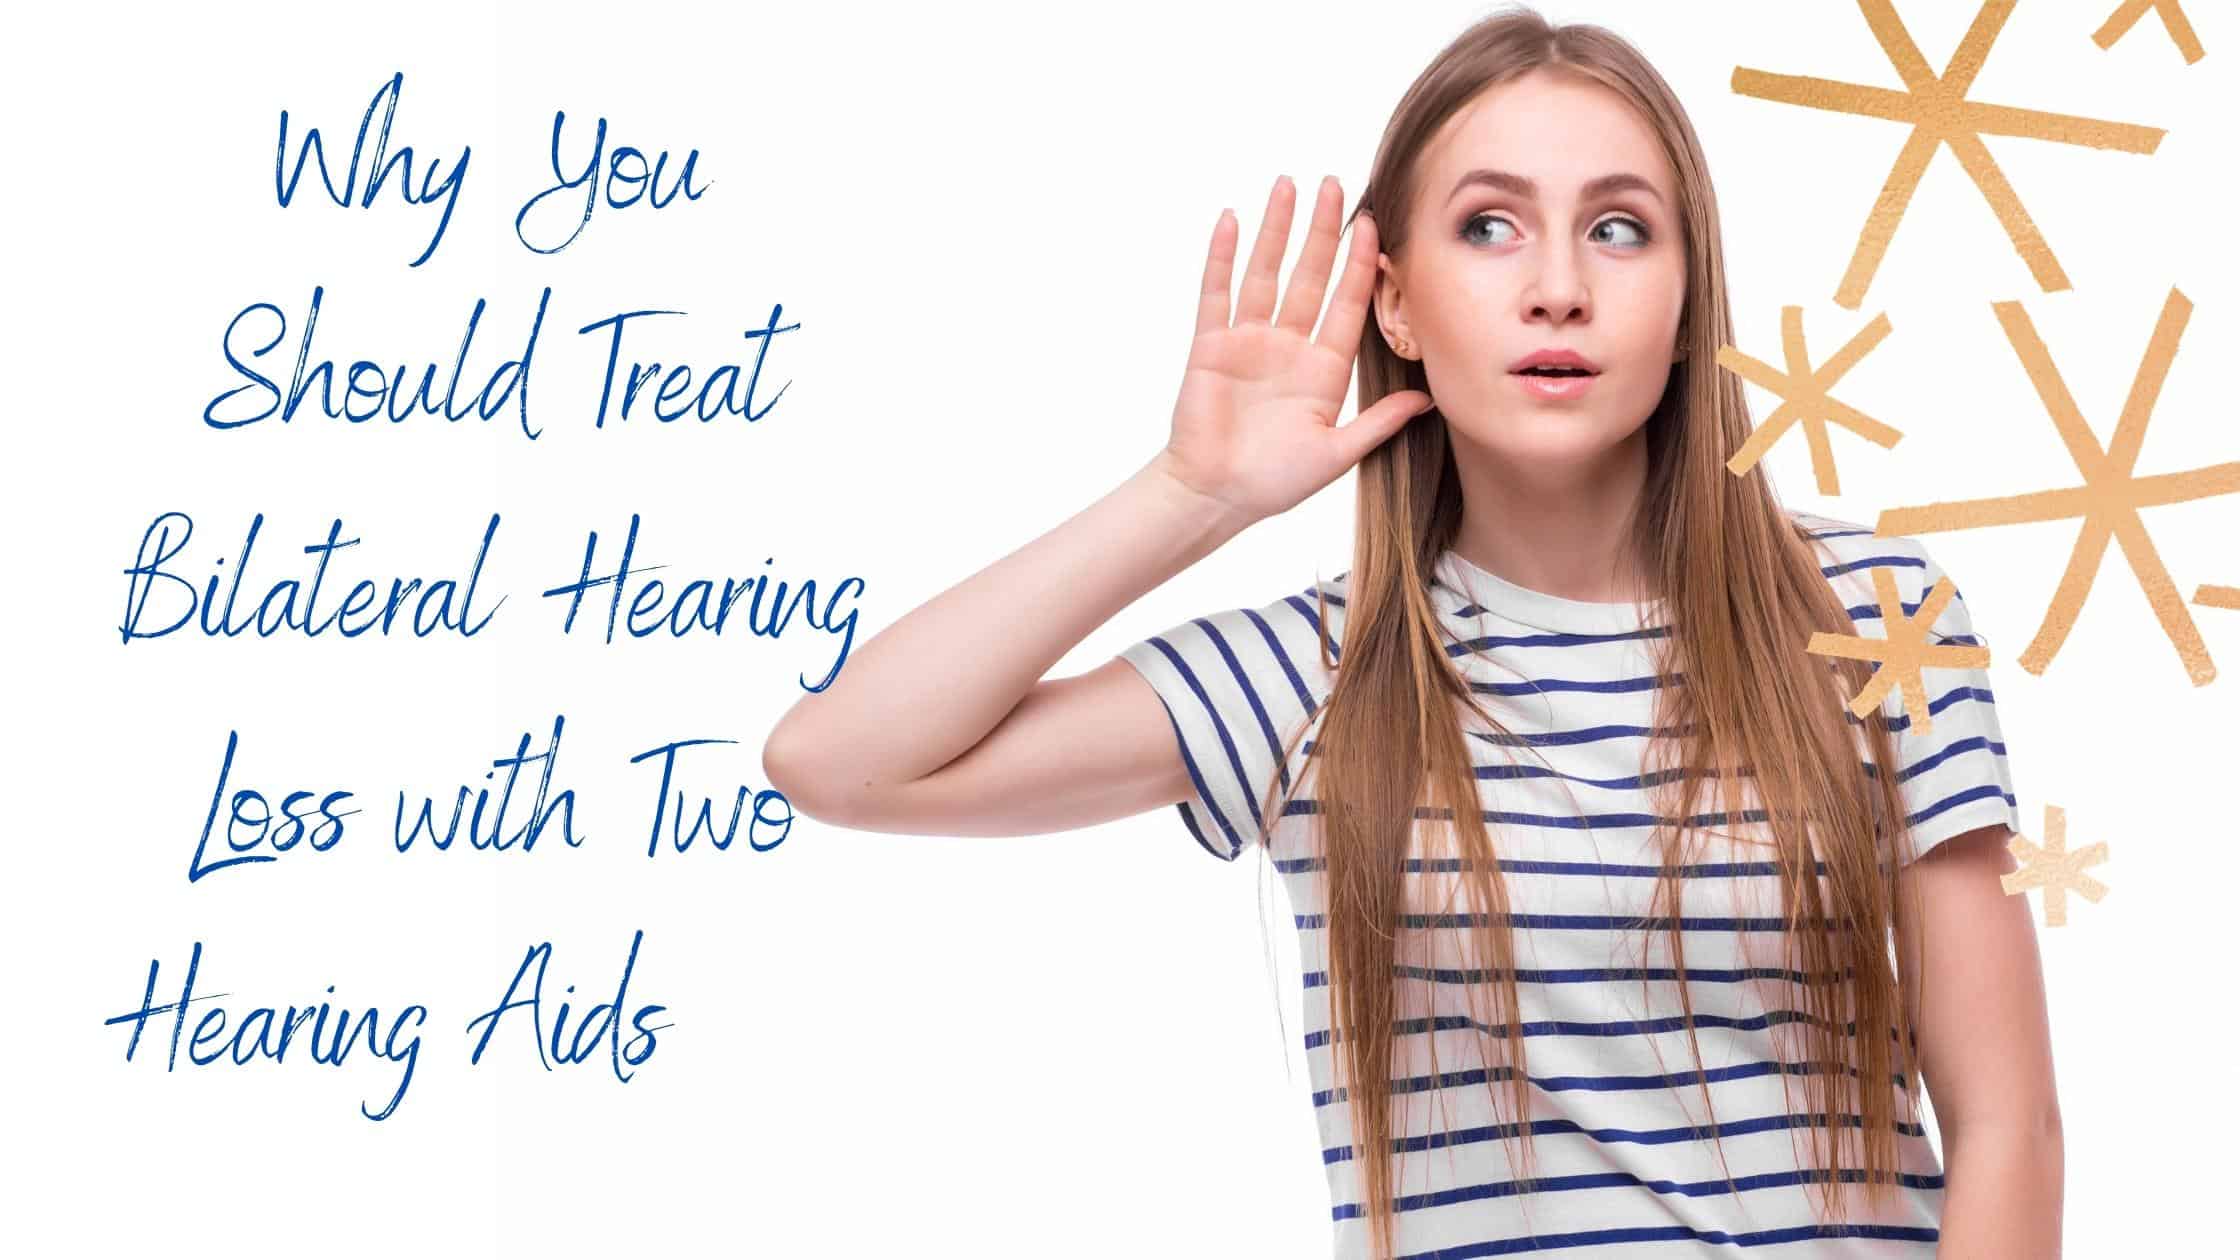 Featured image for “Why You Should Treat Bilateral Hearing Loss with Two Hearing Aids”